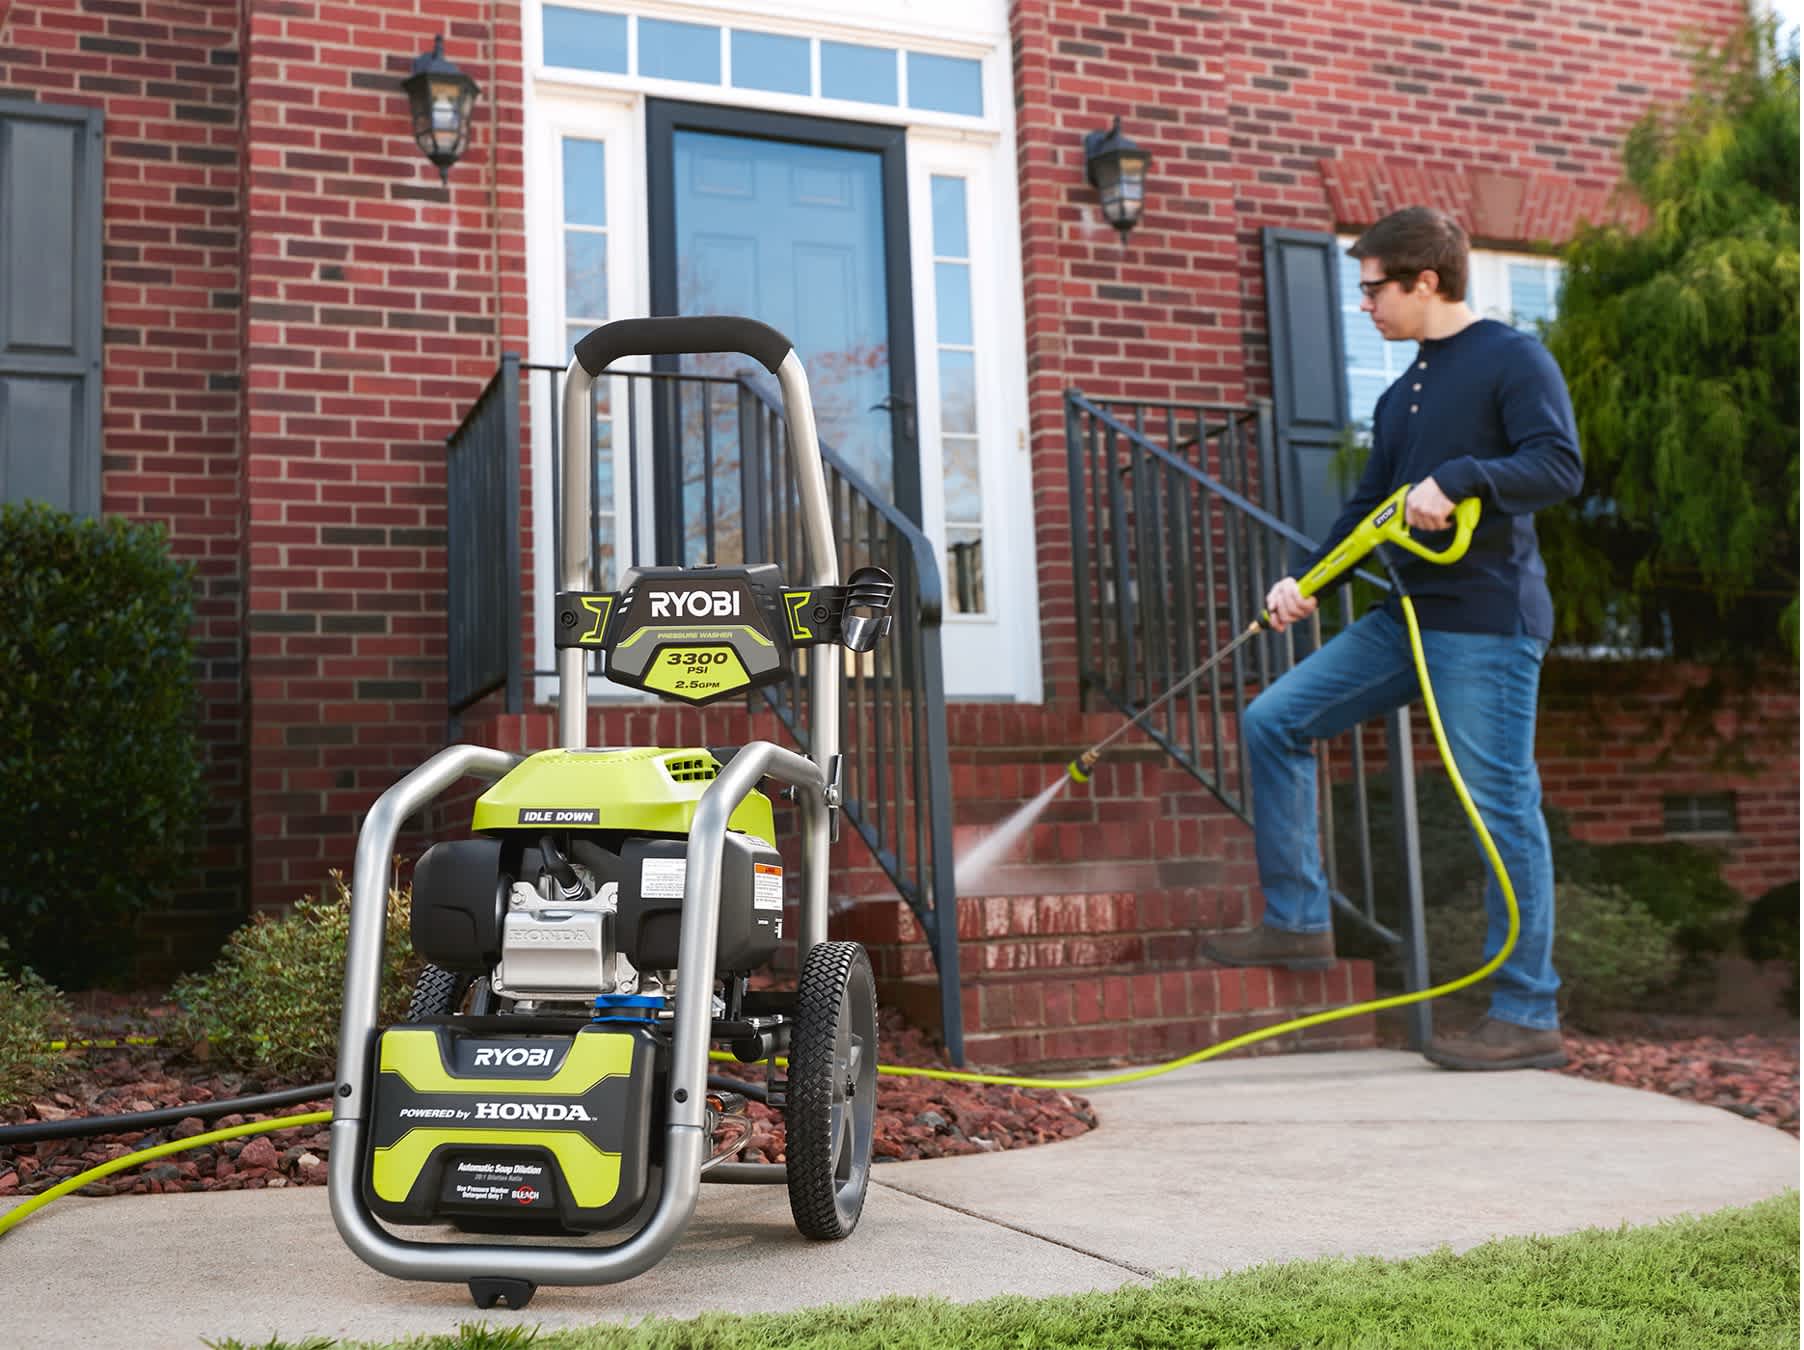 Product Features Image for 3300 PSI 2.5 GPM COLD WATER GAS PRESSURE WASHER.